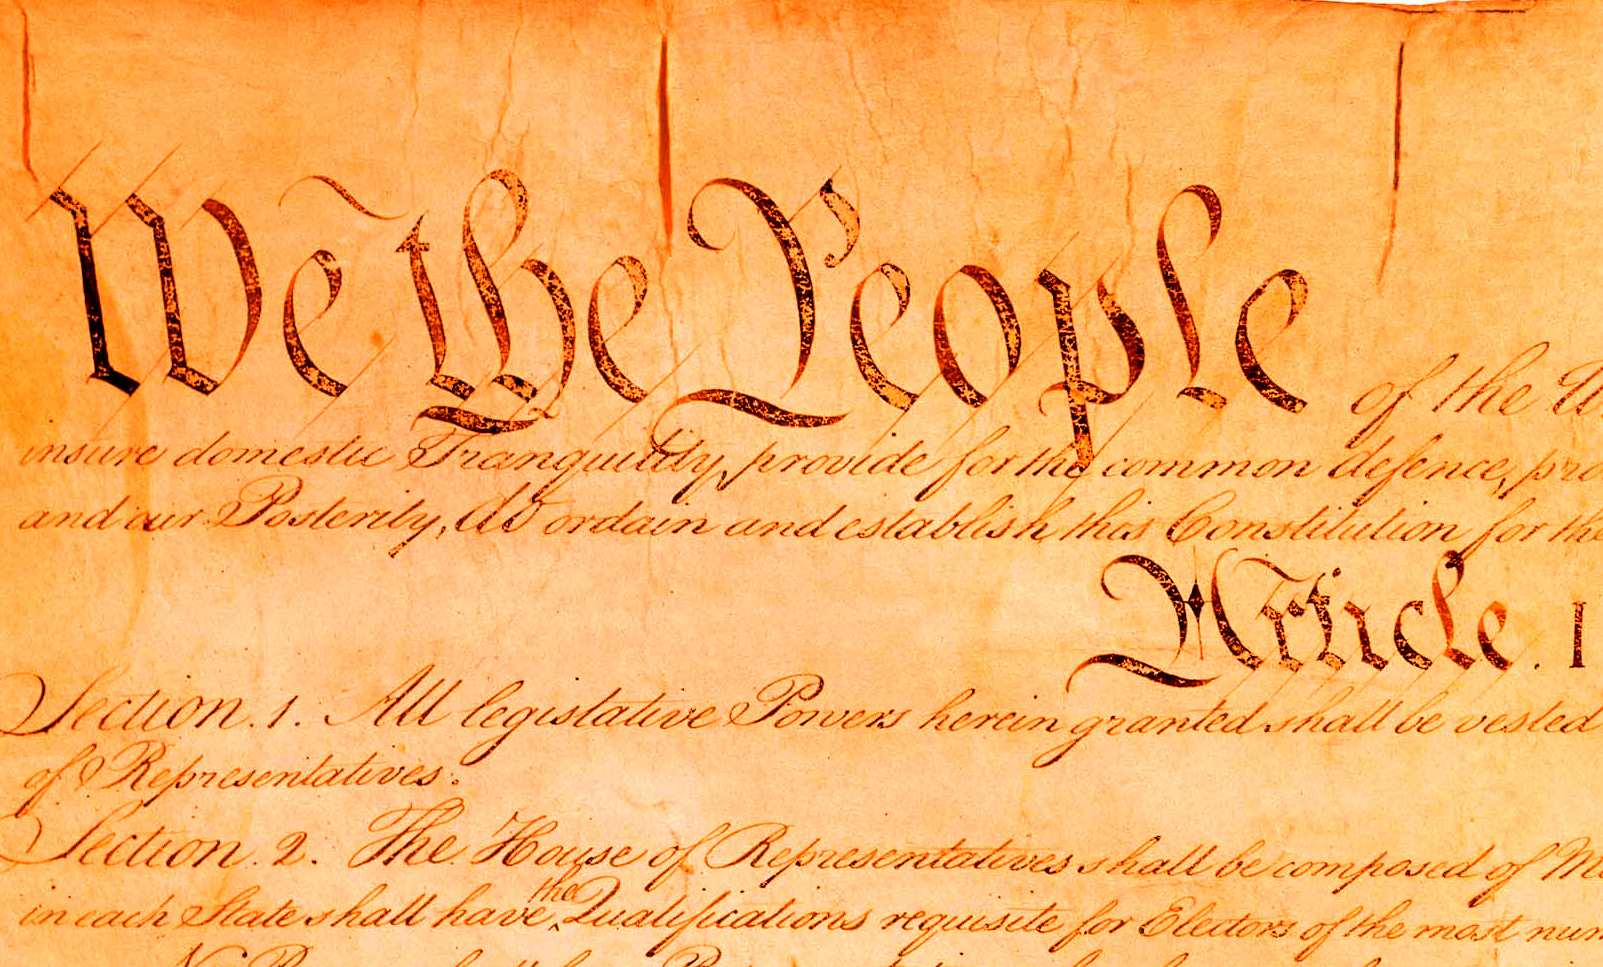 "We the People" image from US Constitution